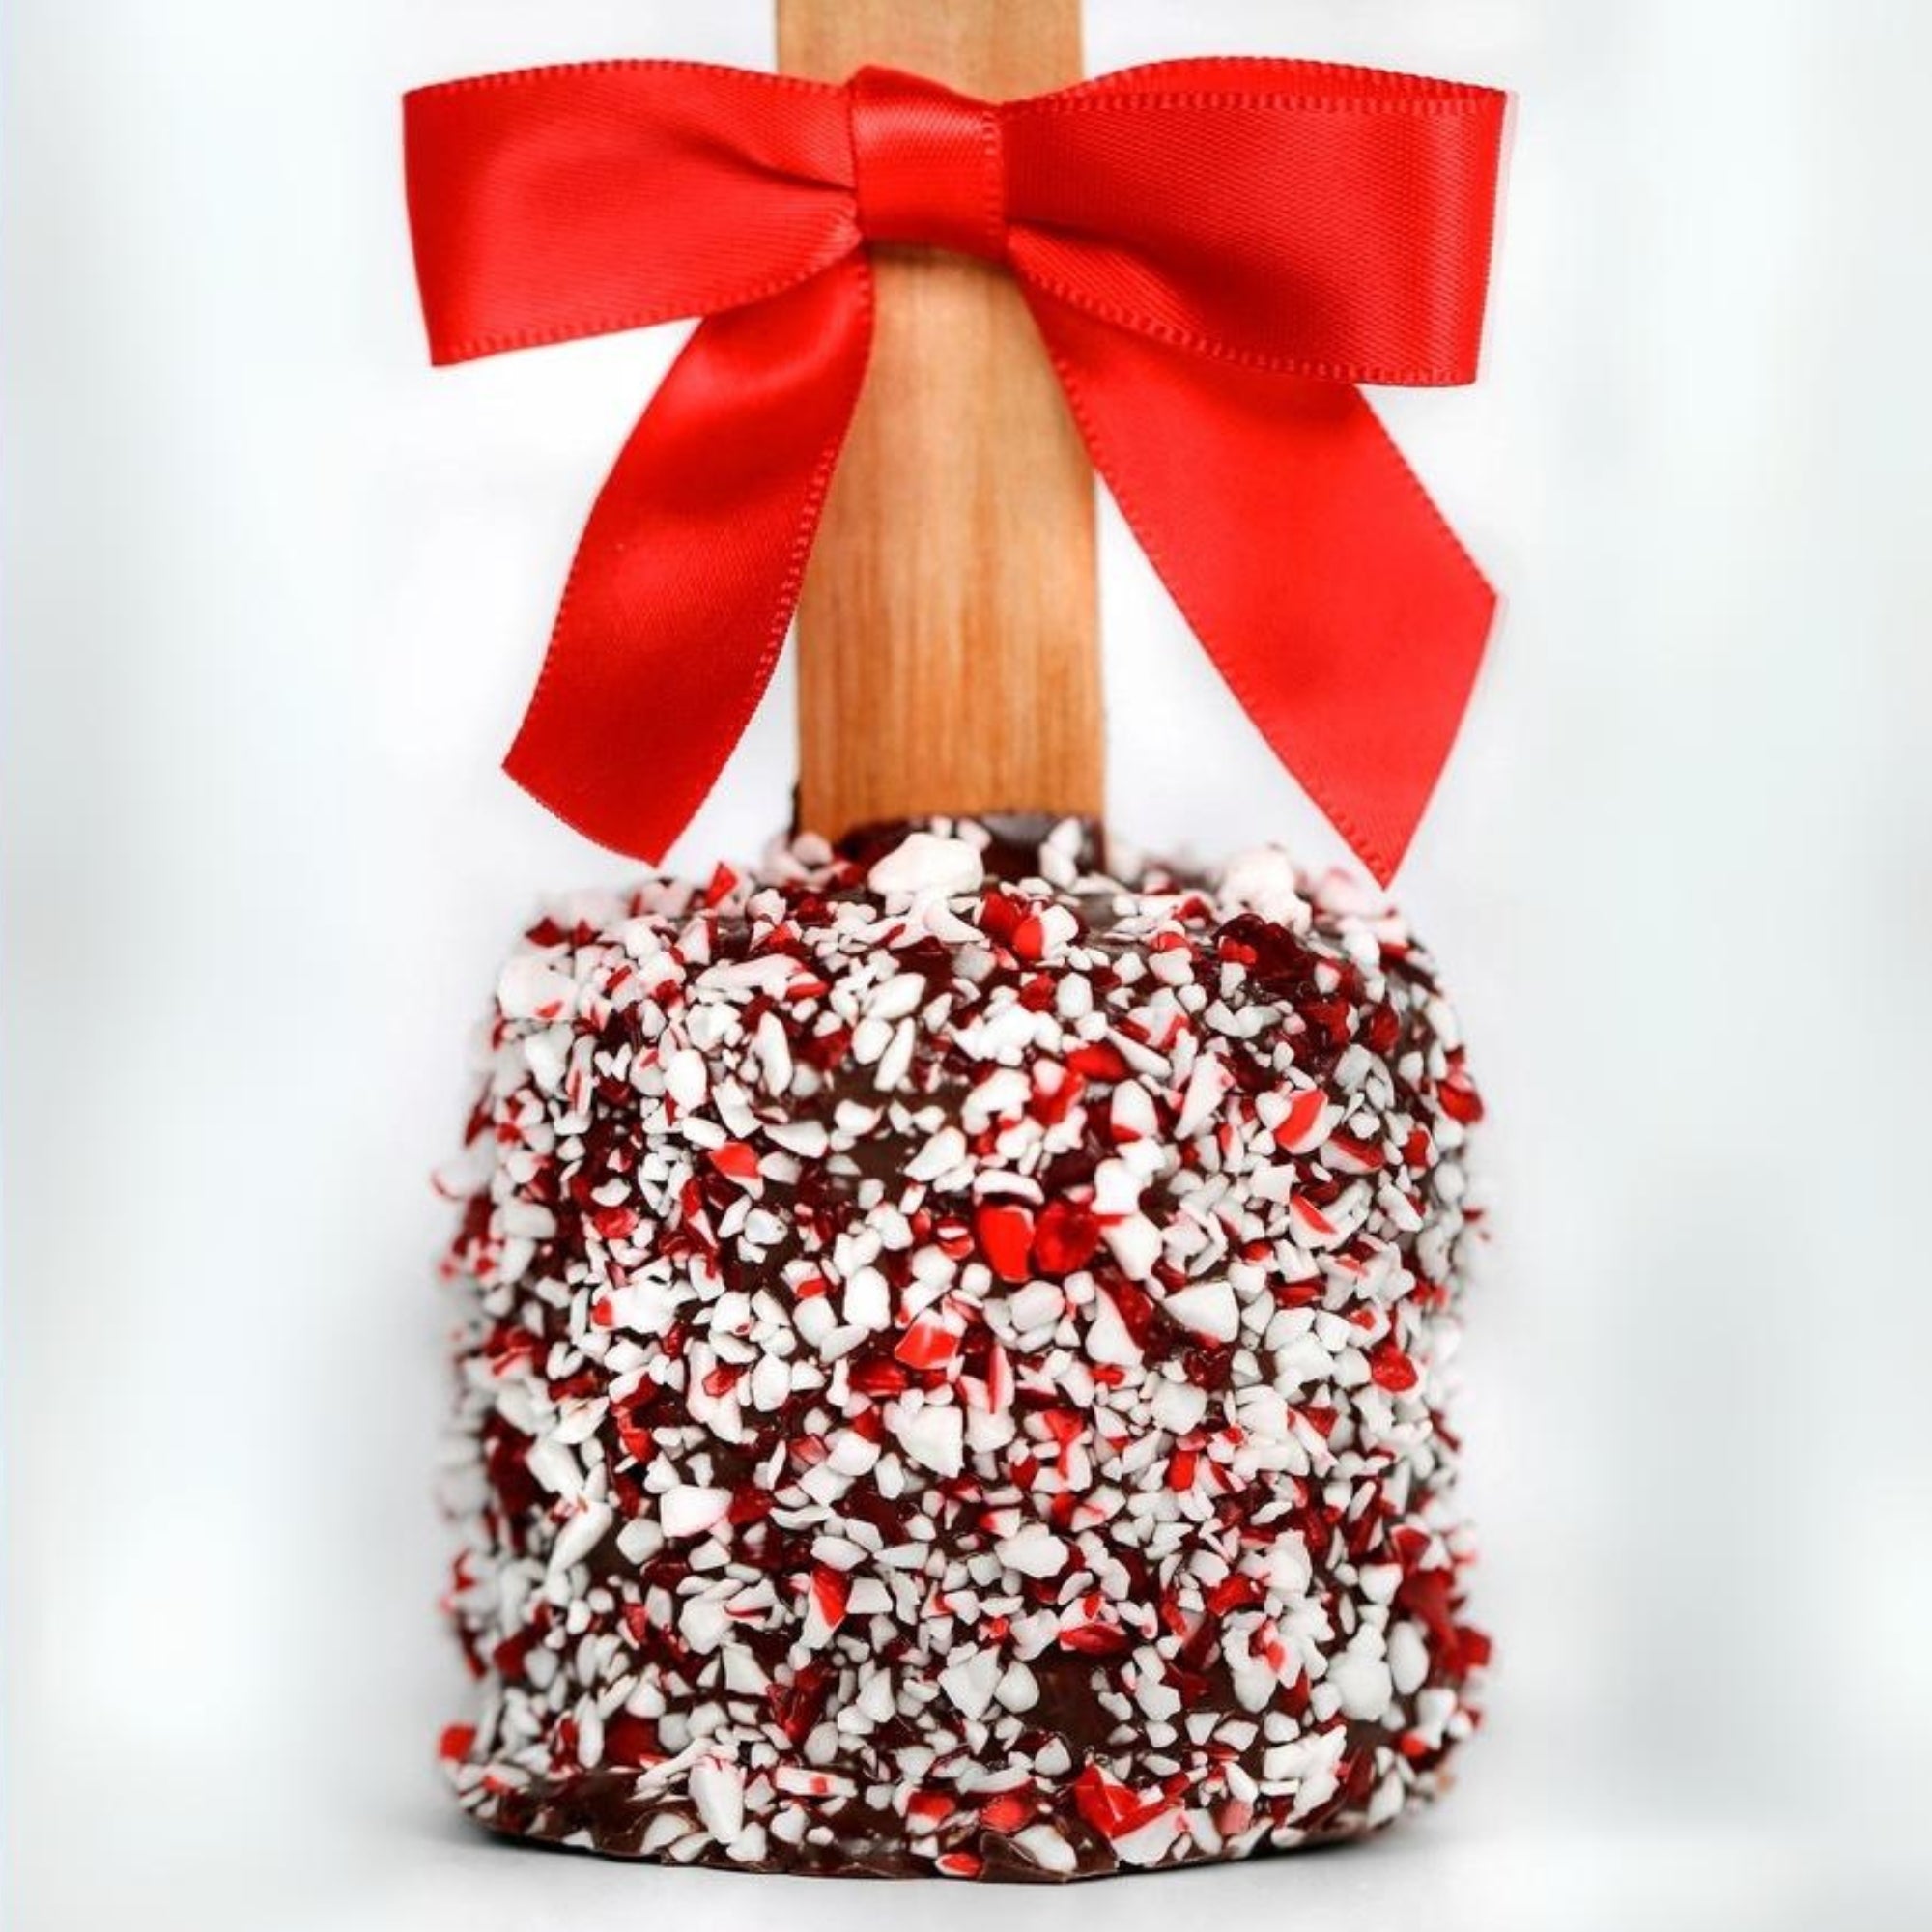 Chocolate Covered Candy Cane Marshmallow